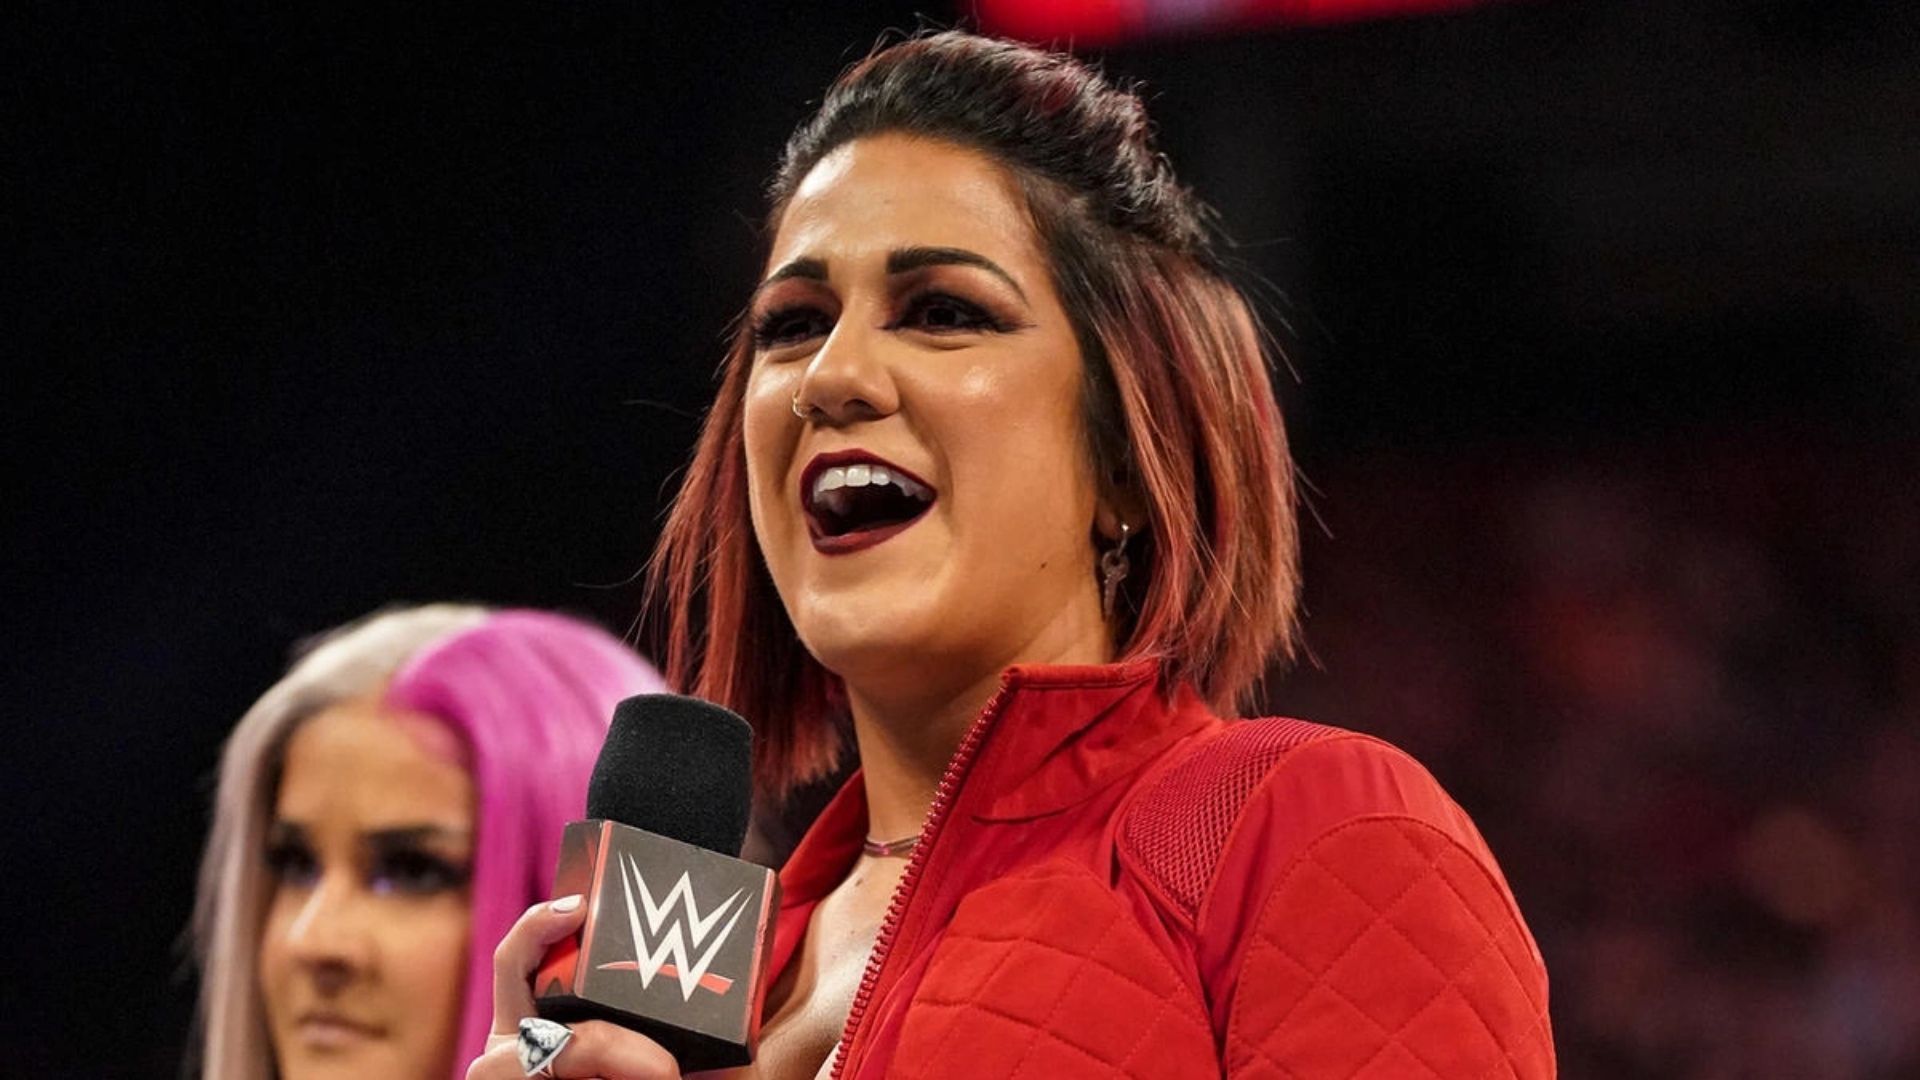 The Role Model recently made her return to WWE.